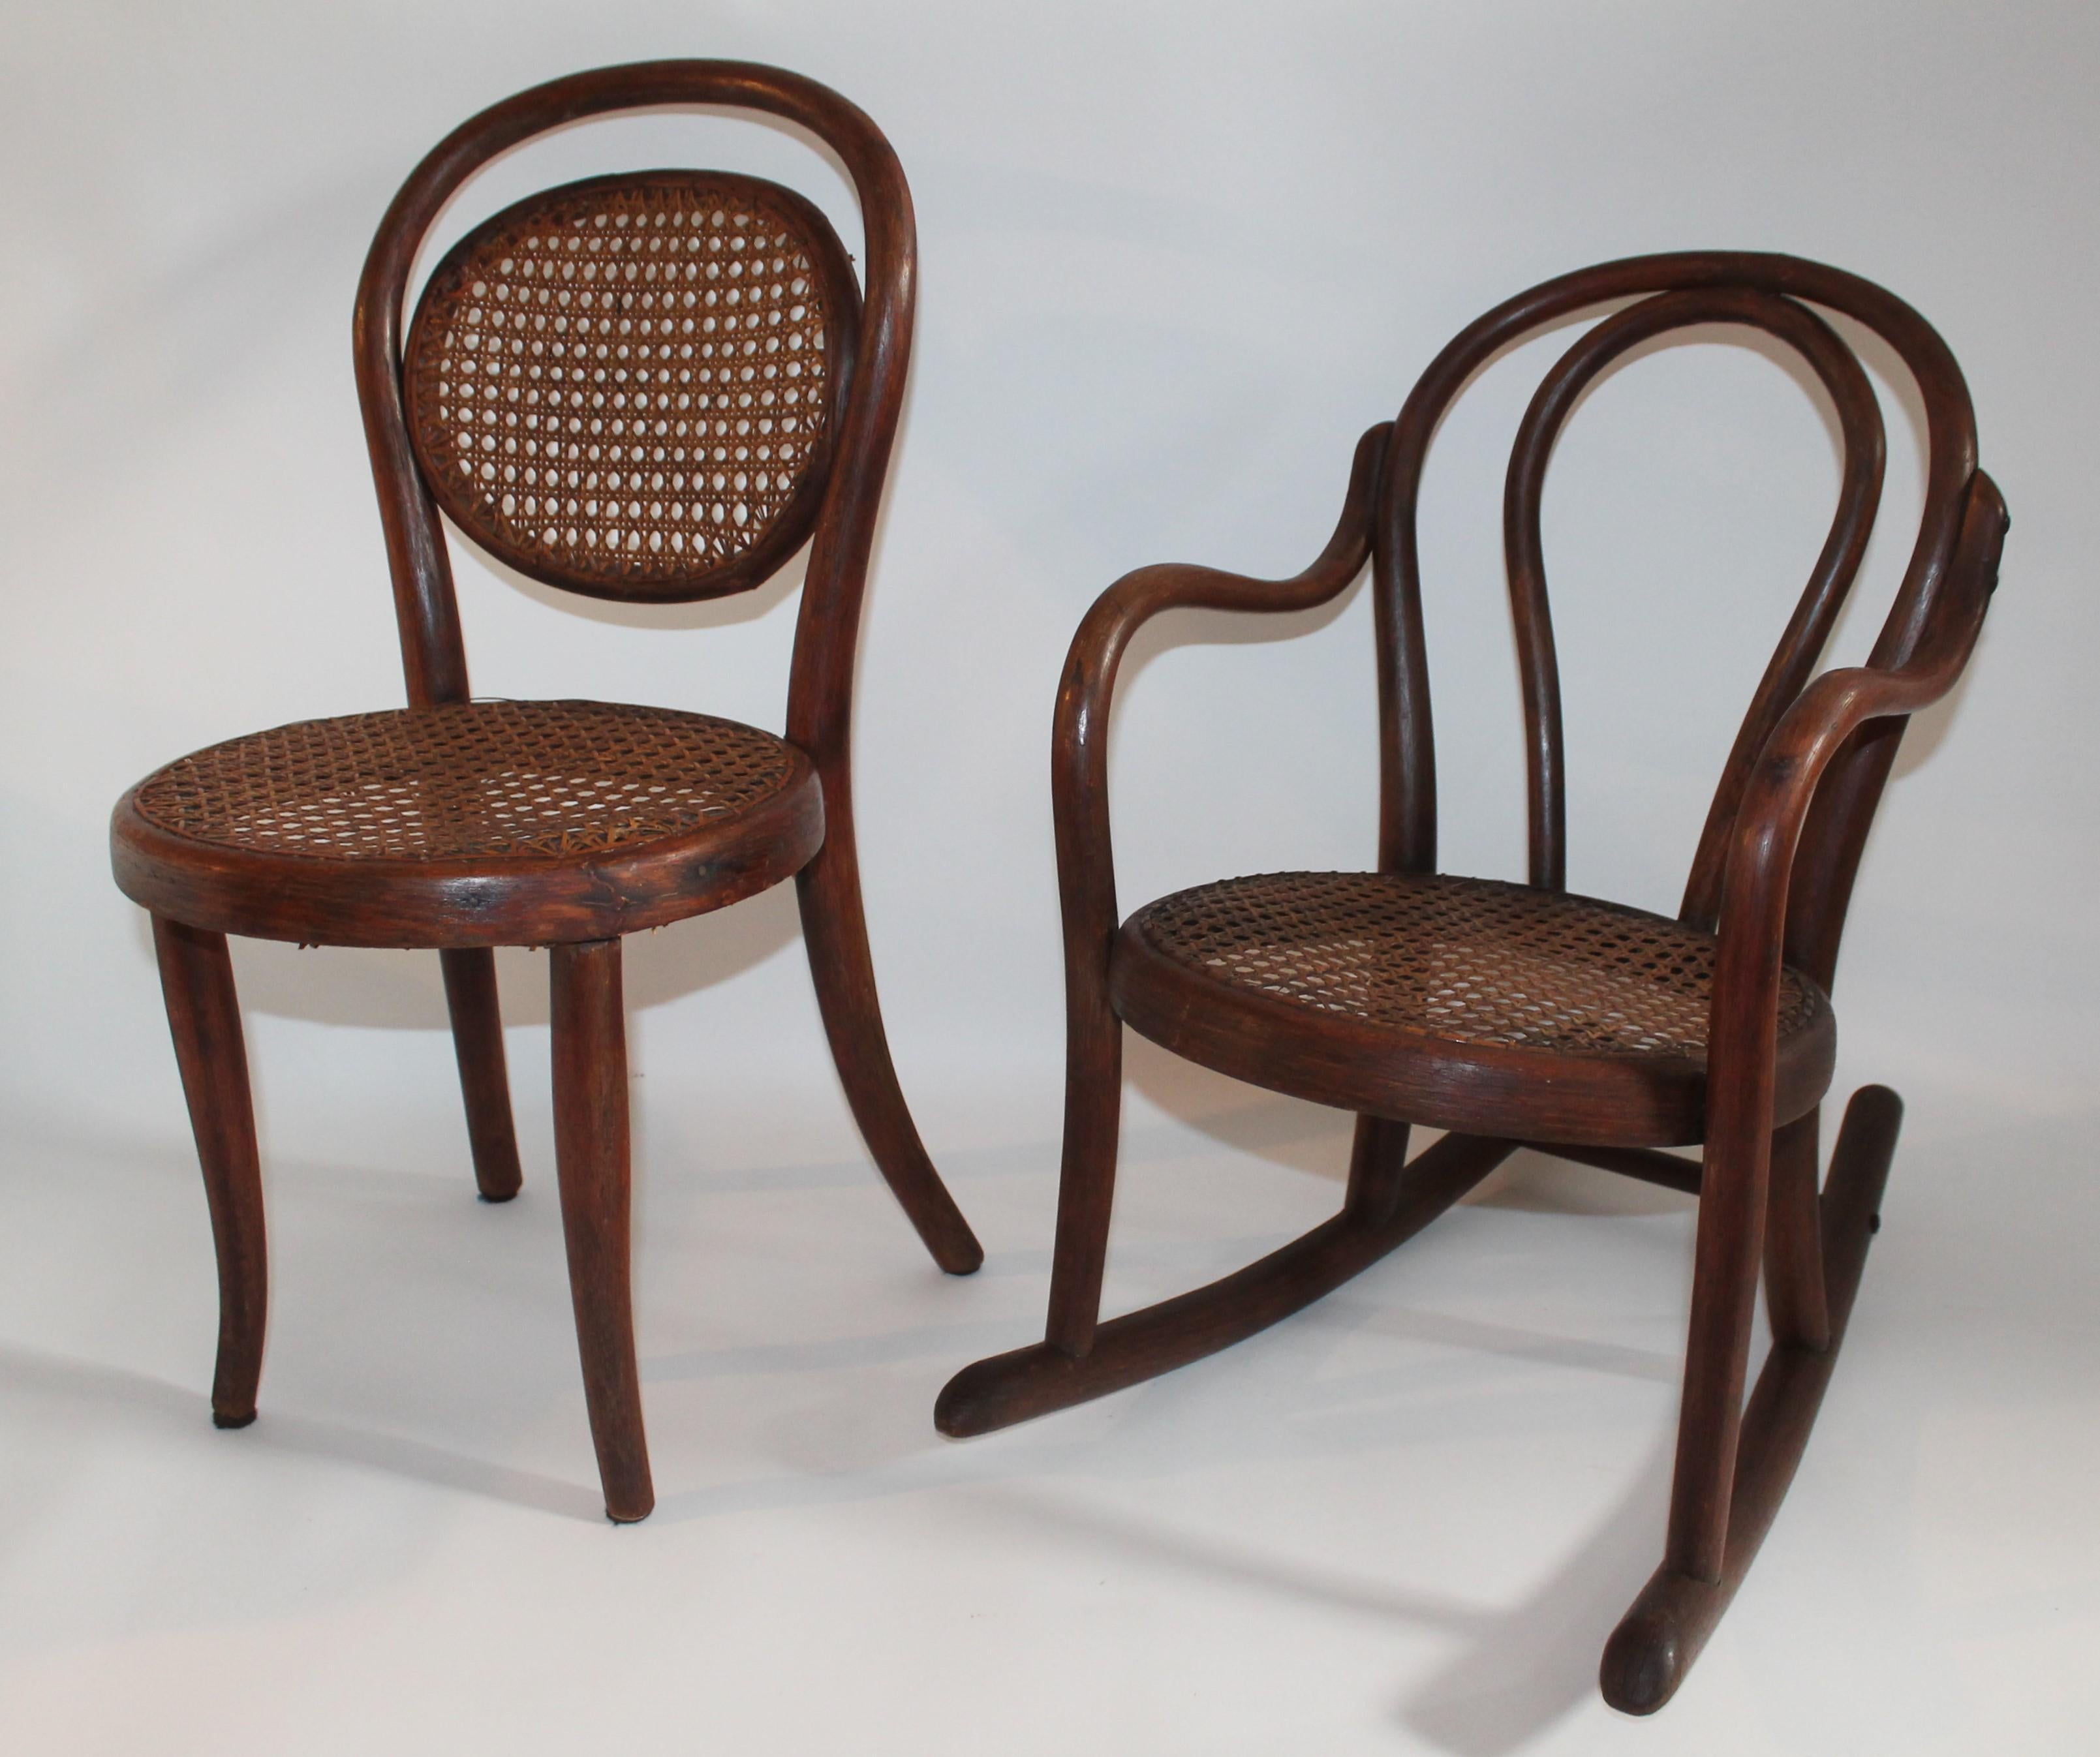 American Bentwood Rocker and Chair with Cane Seats, 19th Century For Sale